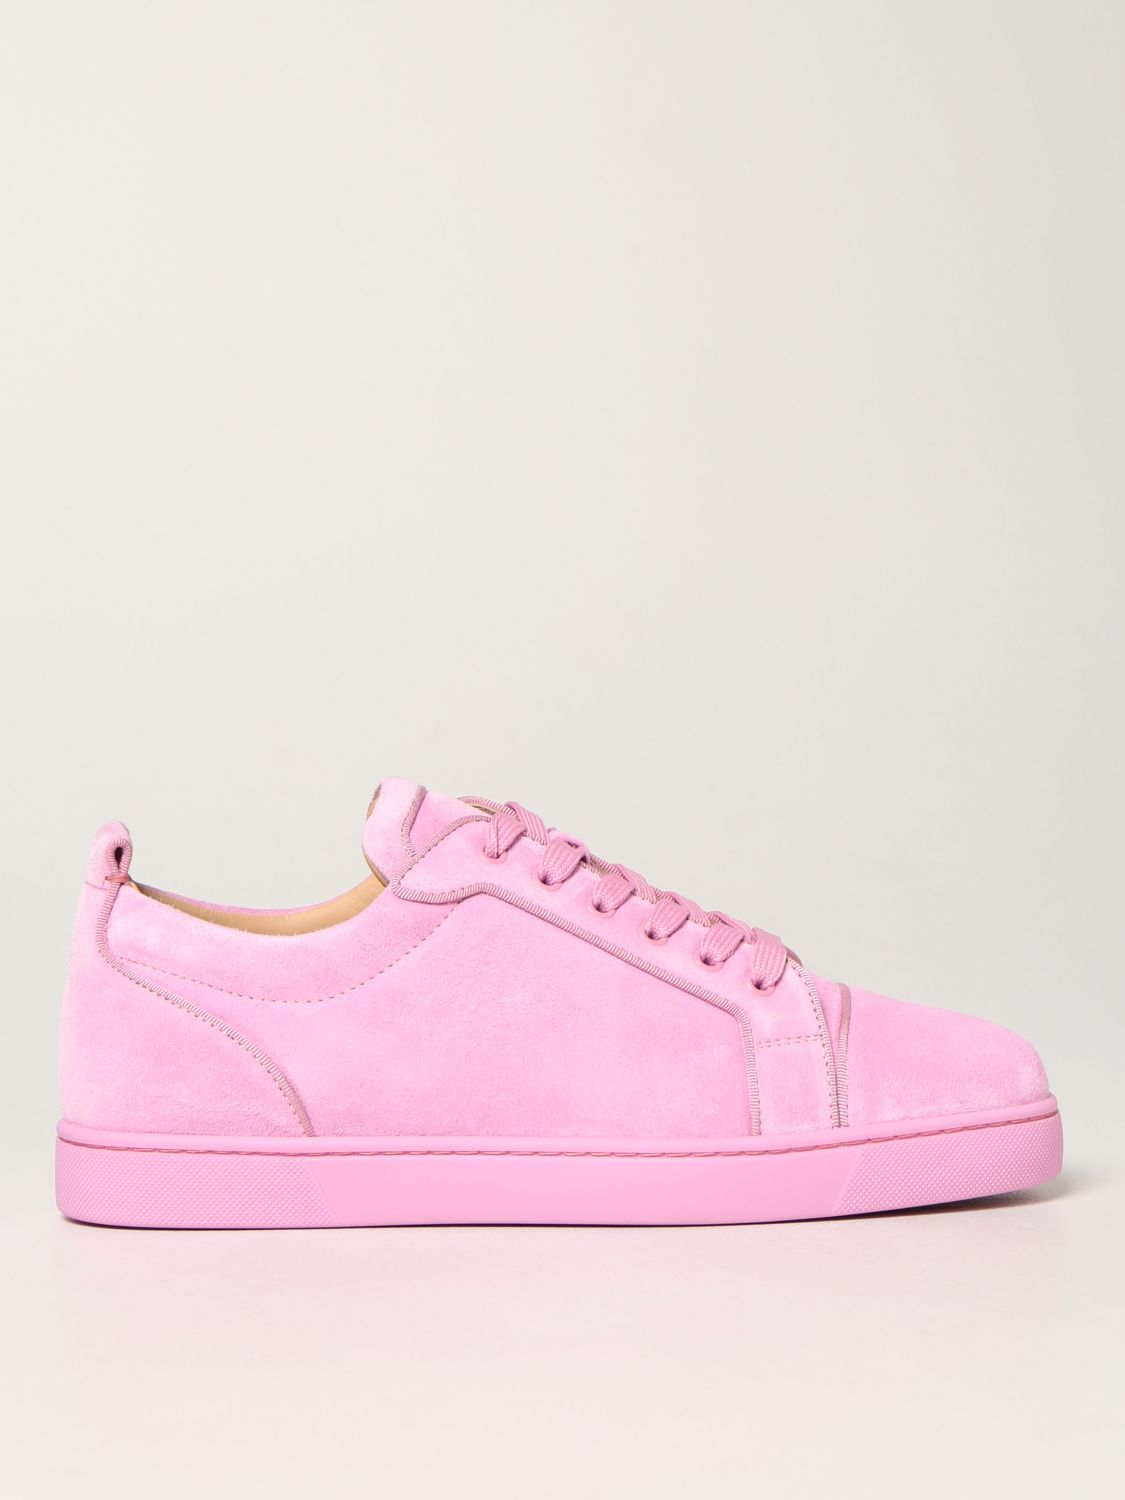 Selv tak lytter Rykke CHRISTIAN LOUBOUTIN: Louis Junior Orlato suede sneakers - Pink | Christian Louboutin  sneakers 3190824 online on GIGLIO.COM